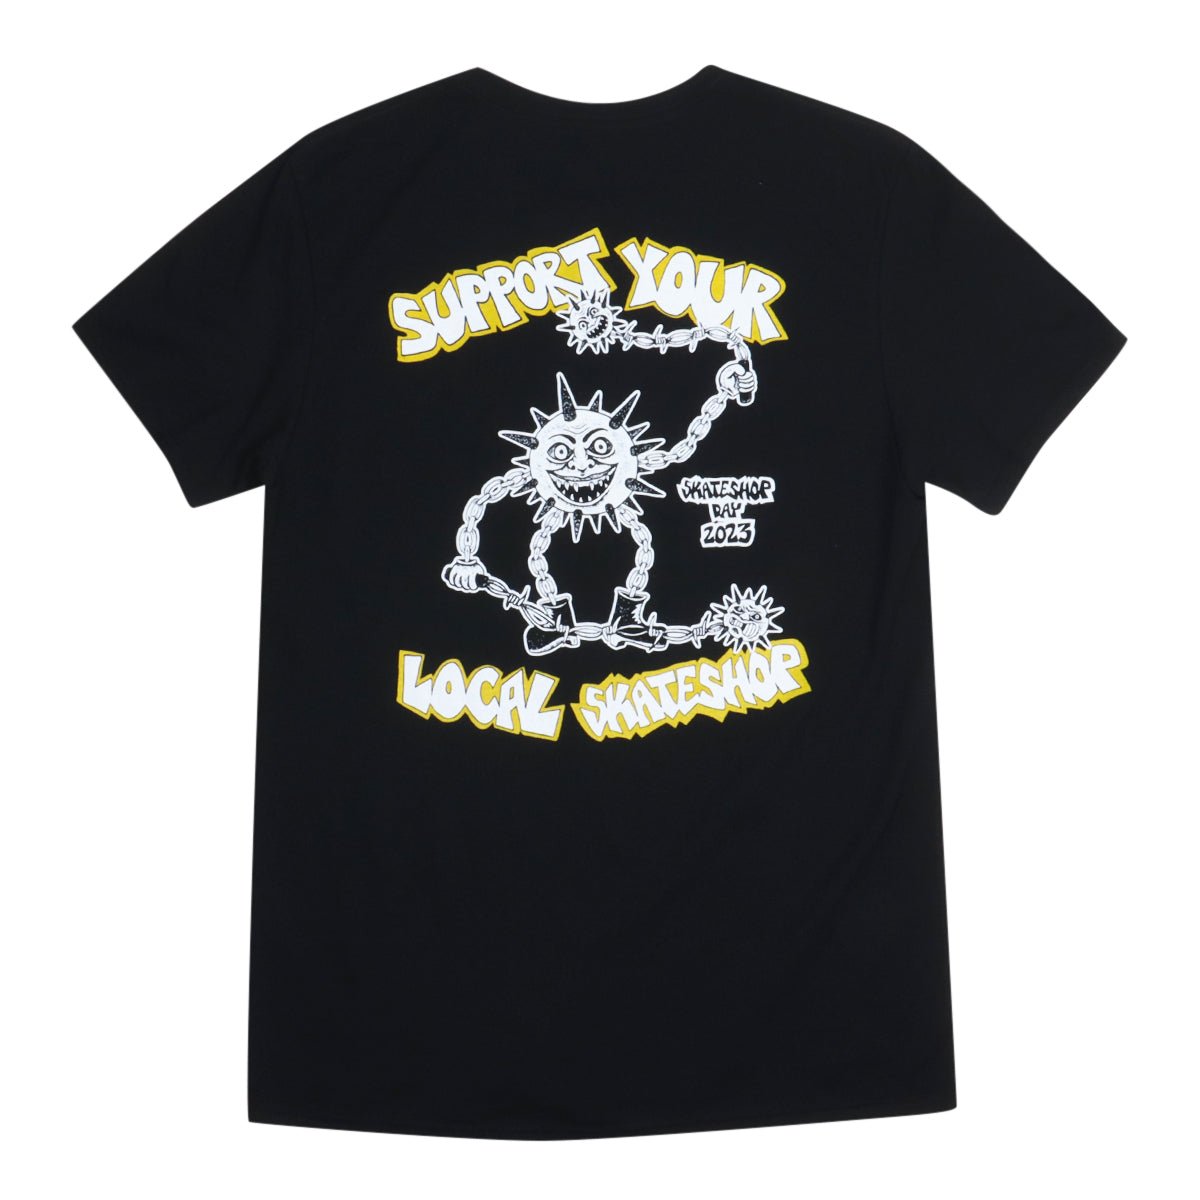 SSD 23 x TC Support Your Local Skate Shop T-Shirt - Black - Town City